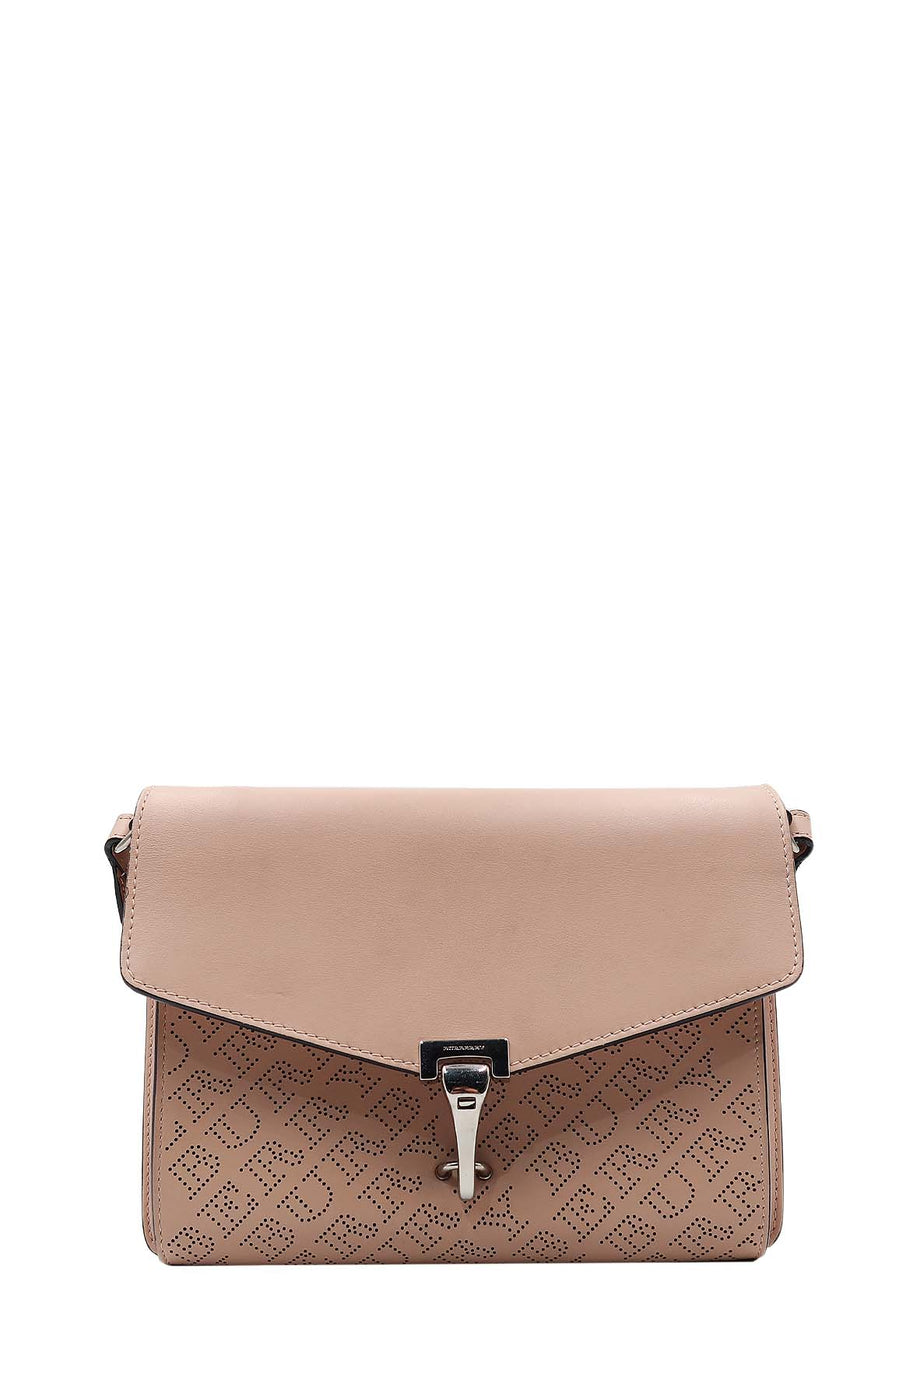 BURBERRY: Crossbody bags woman - Green | BURBERRY crossbody bags 8081351  online at GIGLIO.COM